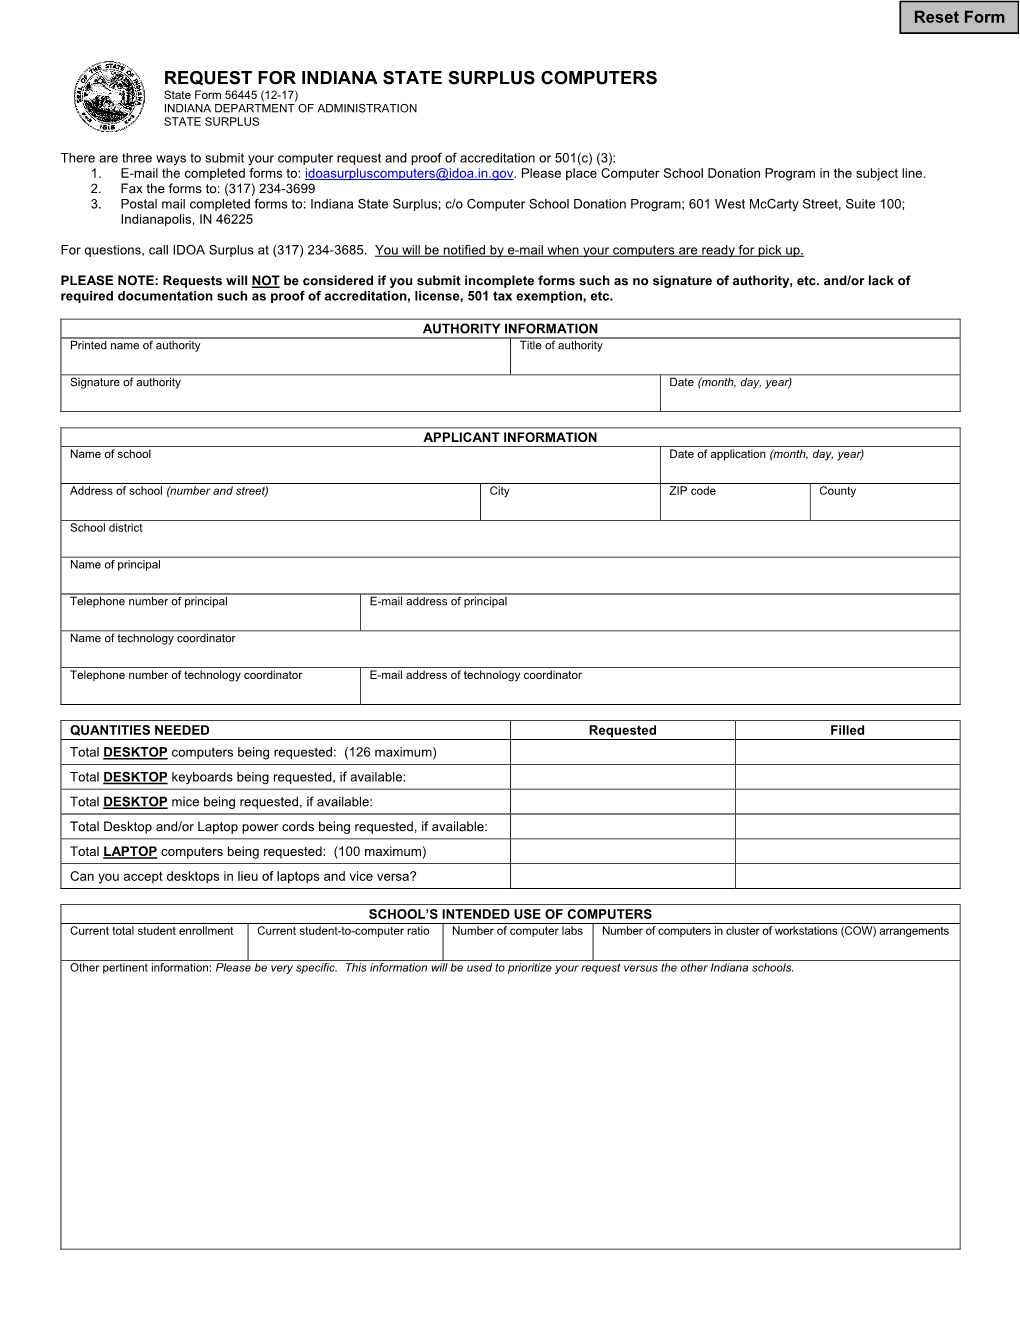 REQUEST for INDIANA STATE SURPLUS COMPUTERS State Form 56445 (12-17) INDIANA DEPARTMENT of ADMINISTRATION STATE SURPLUS